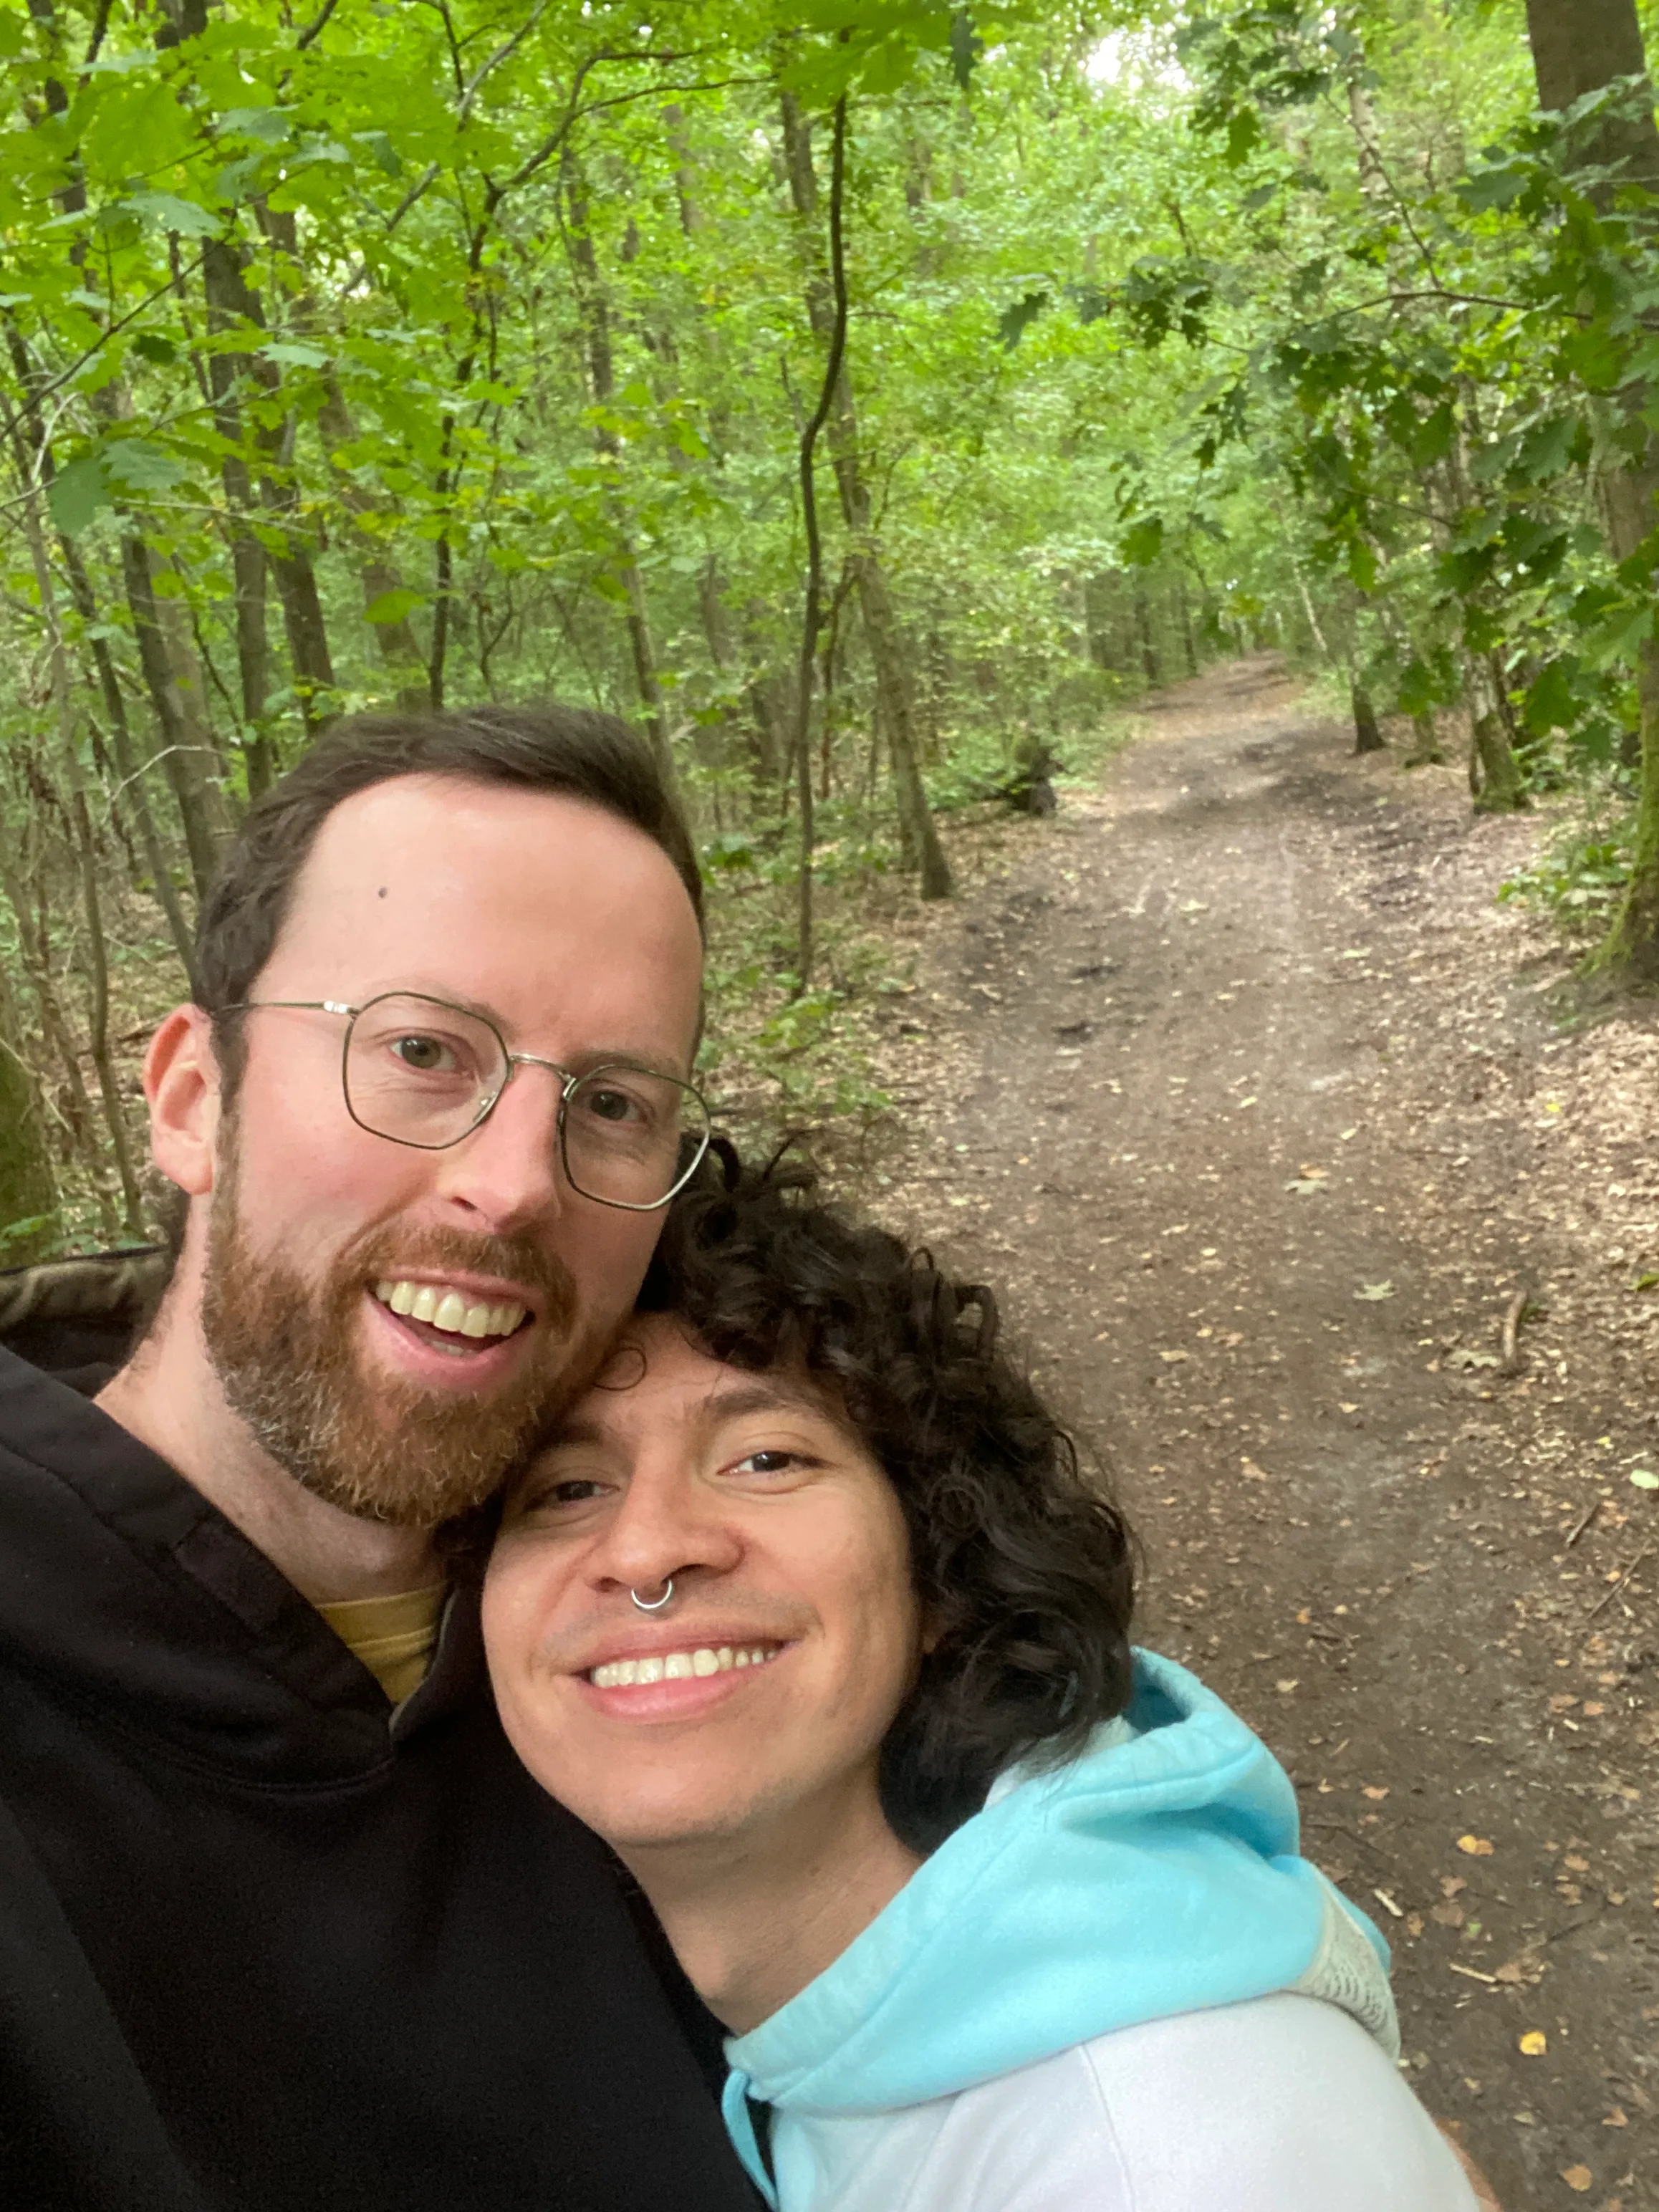 Founder Stefaan De Vreese and his boyfriend on a hike